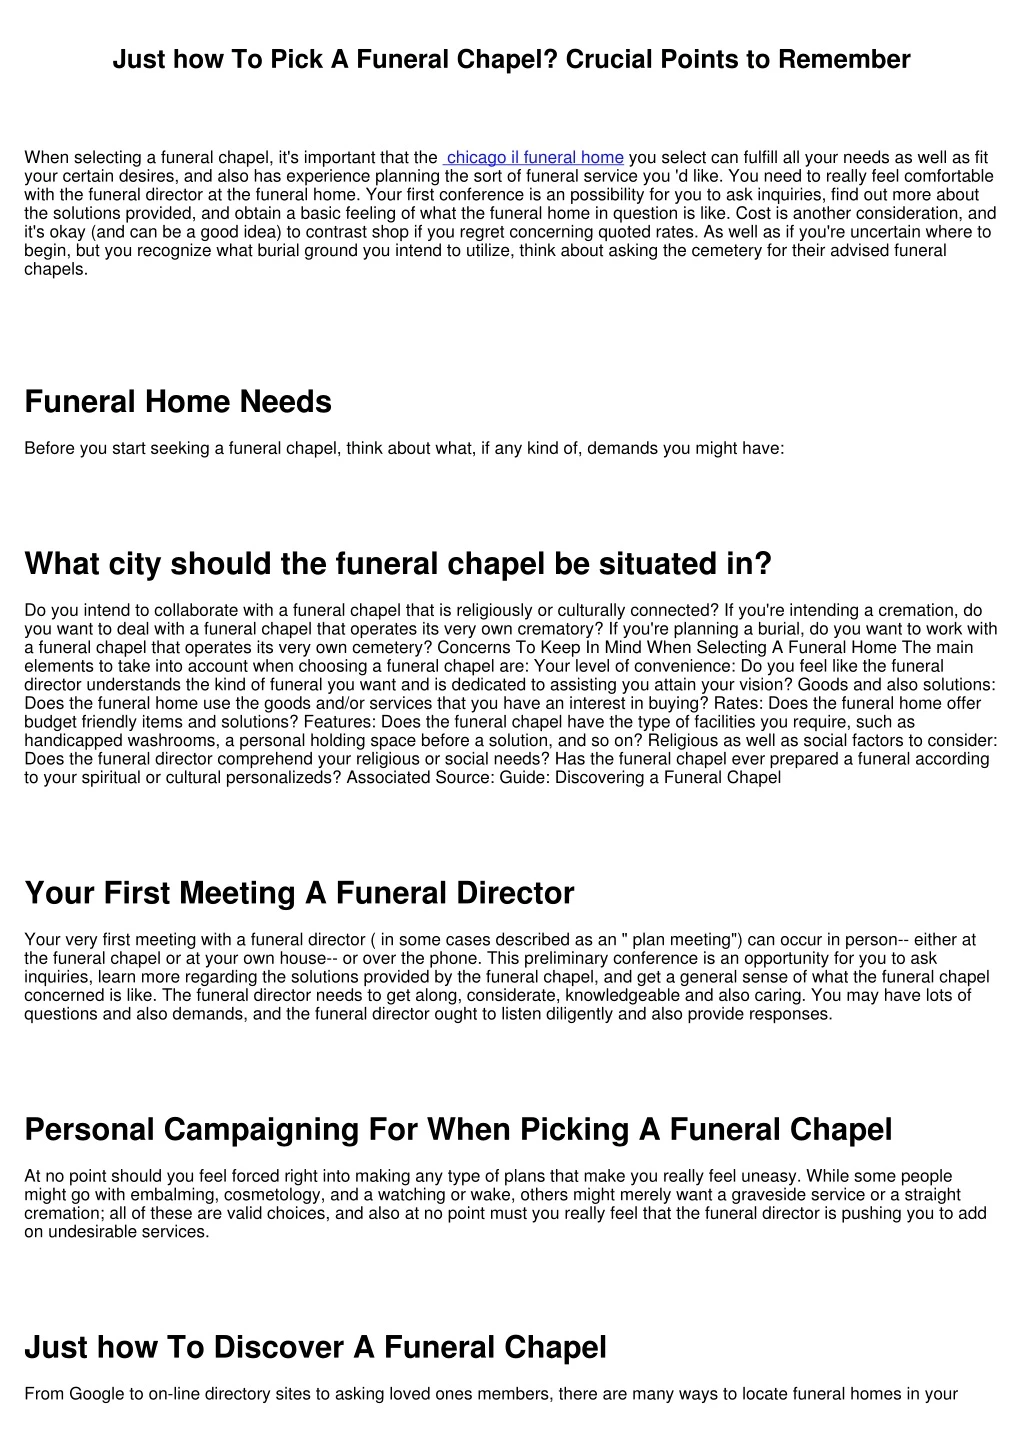 just how to pick a funeral chapel crucial points